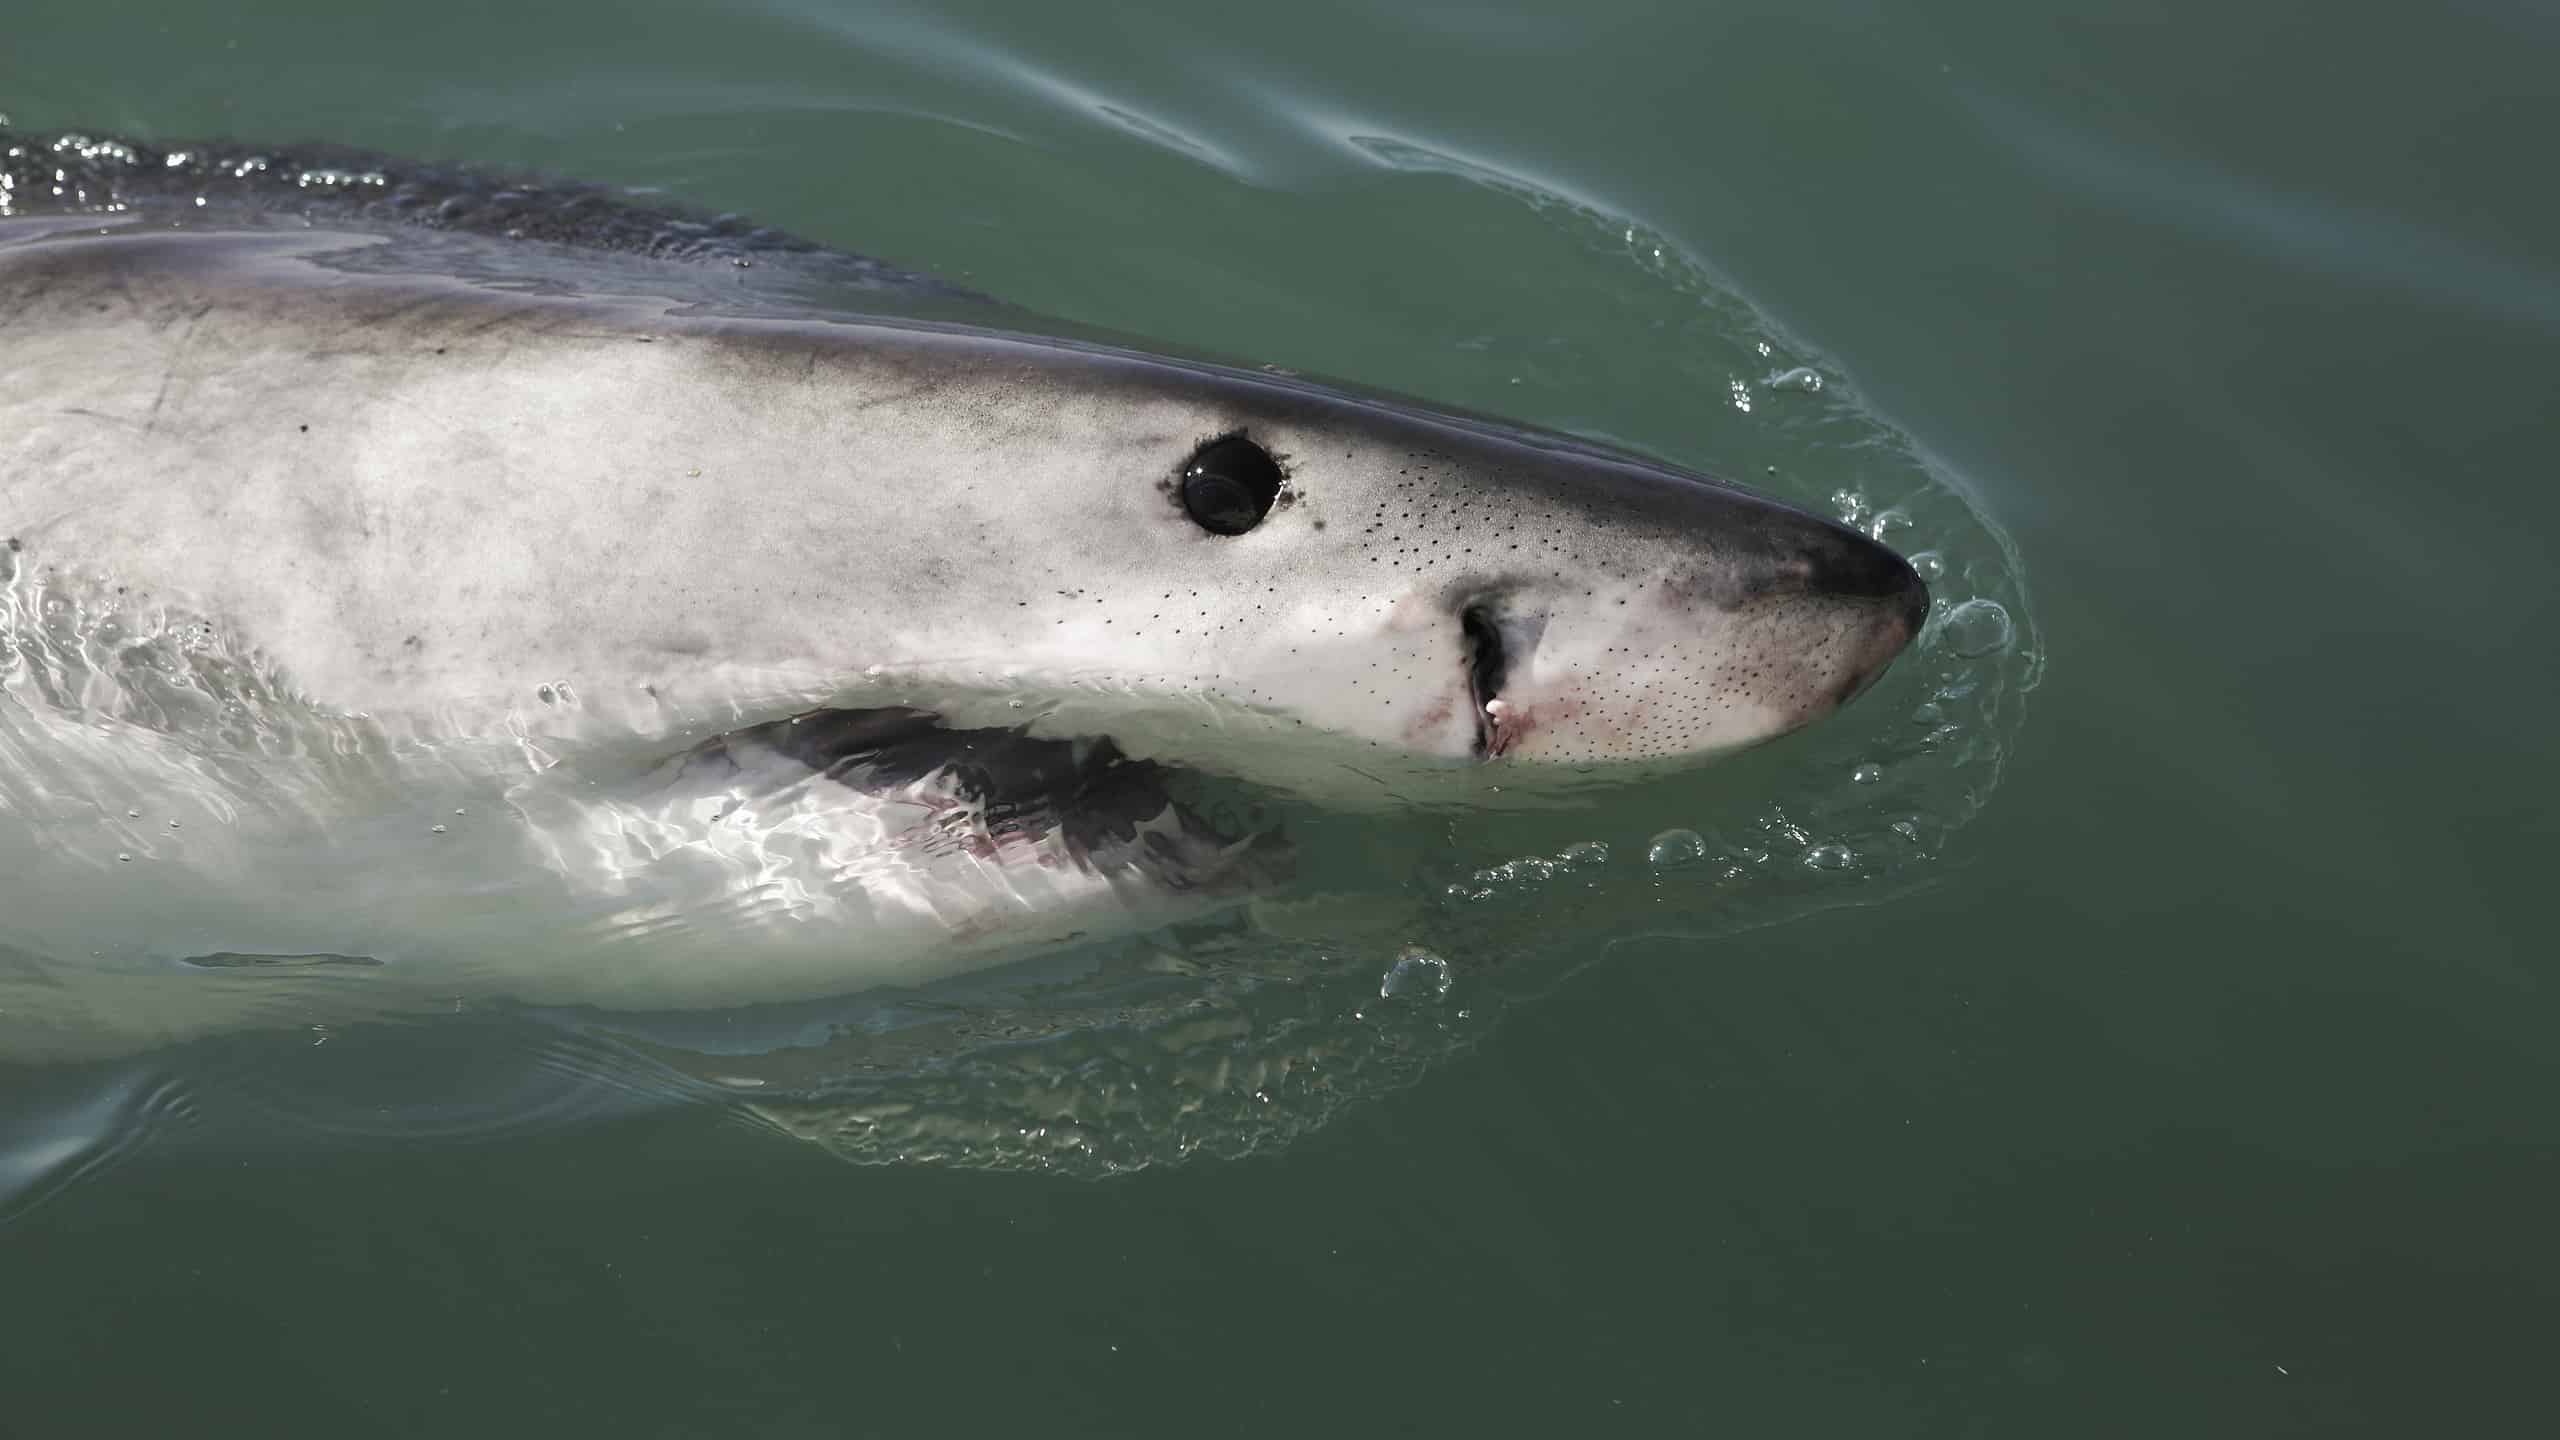 Juvenile great white shark (Carcharodon carcharias) breaching on ocean surface in South Africa